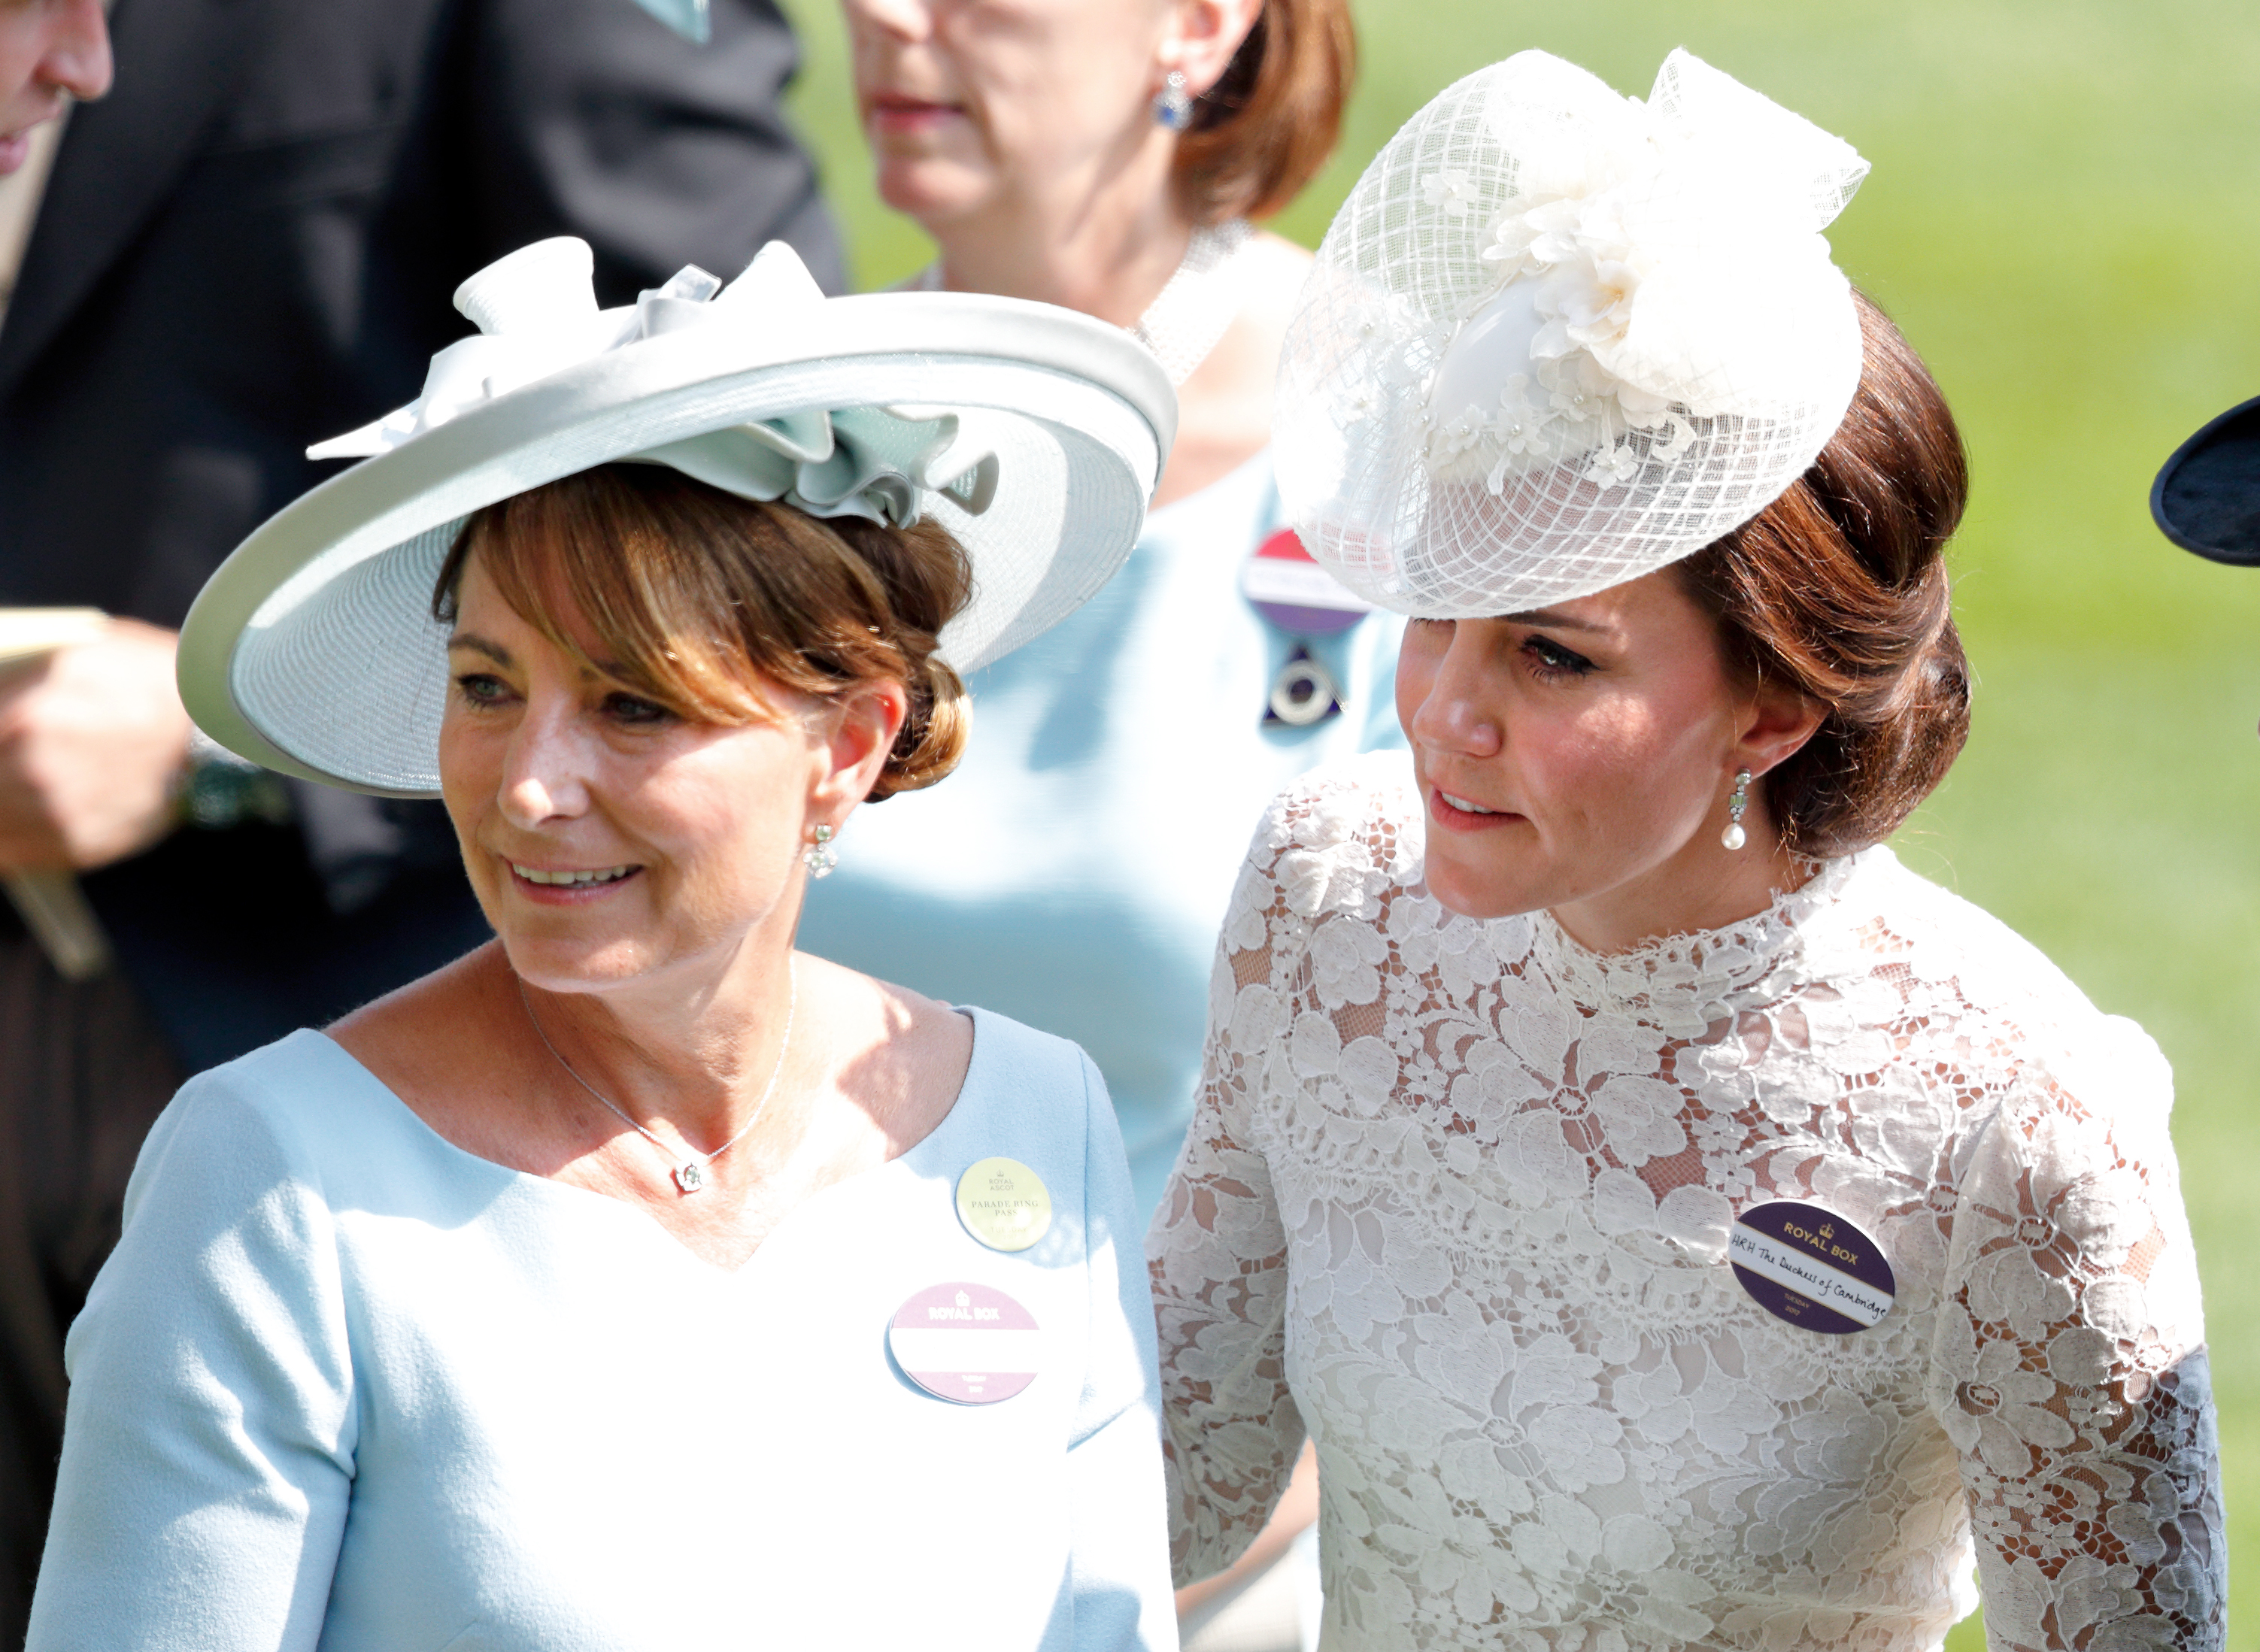 Carole Middleton and Princess Catherine at the Royal Ascot in Ascot, England on June 20, 2017 | Source: Getty Images